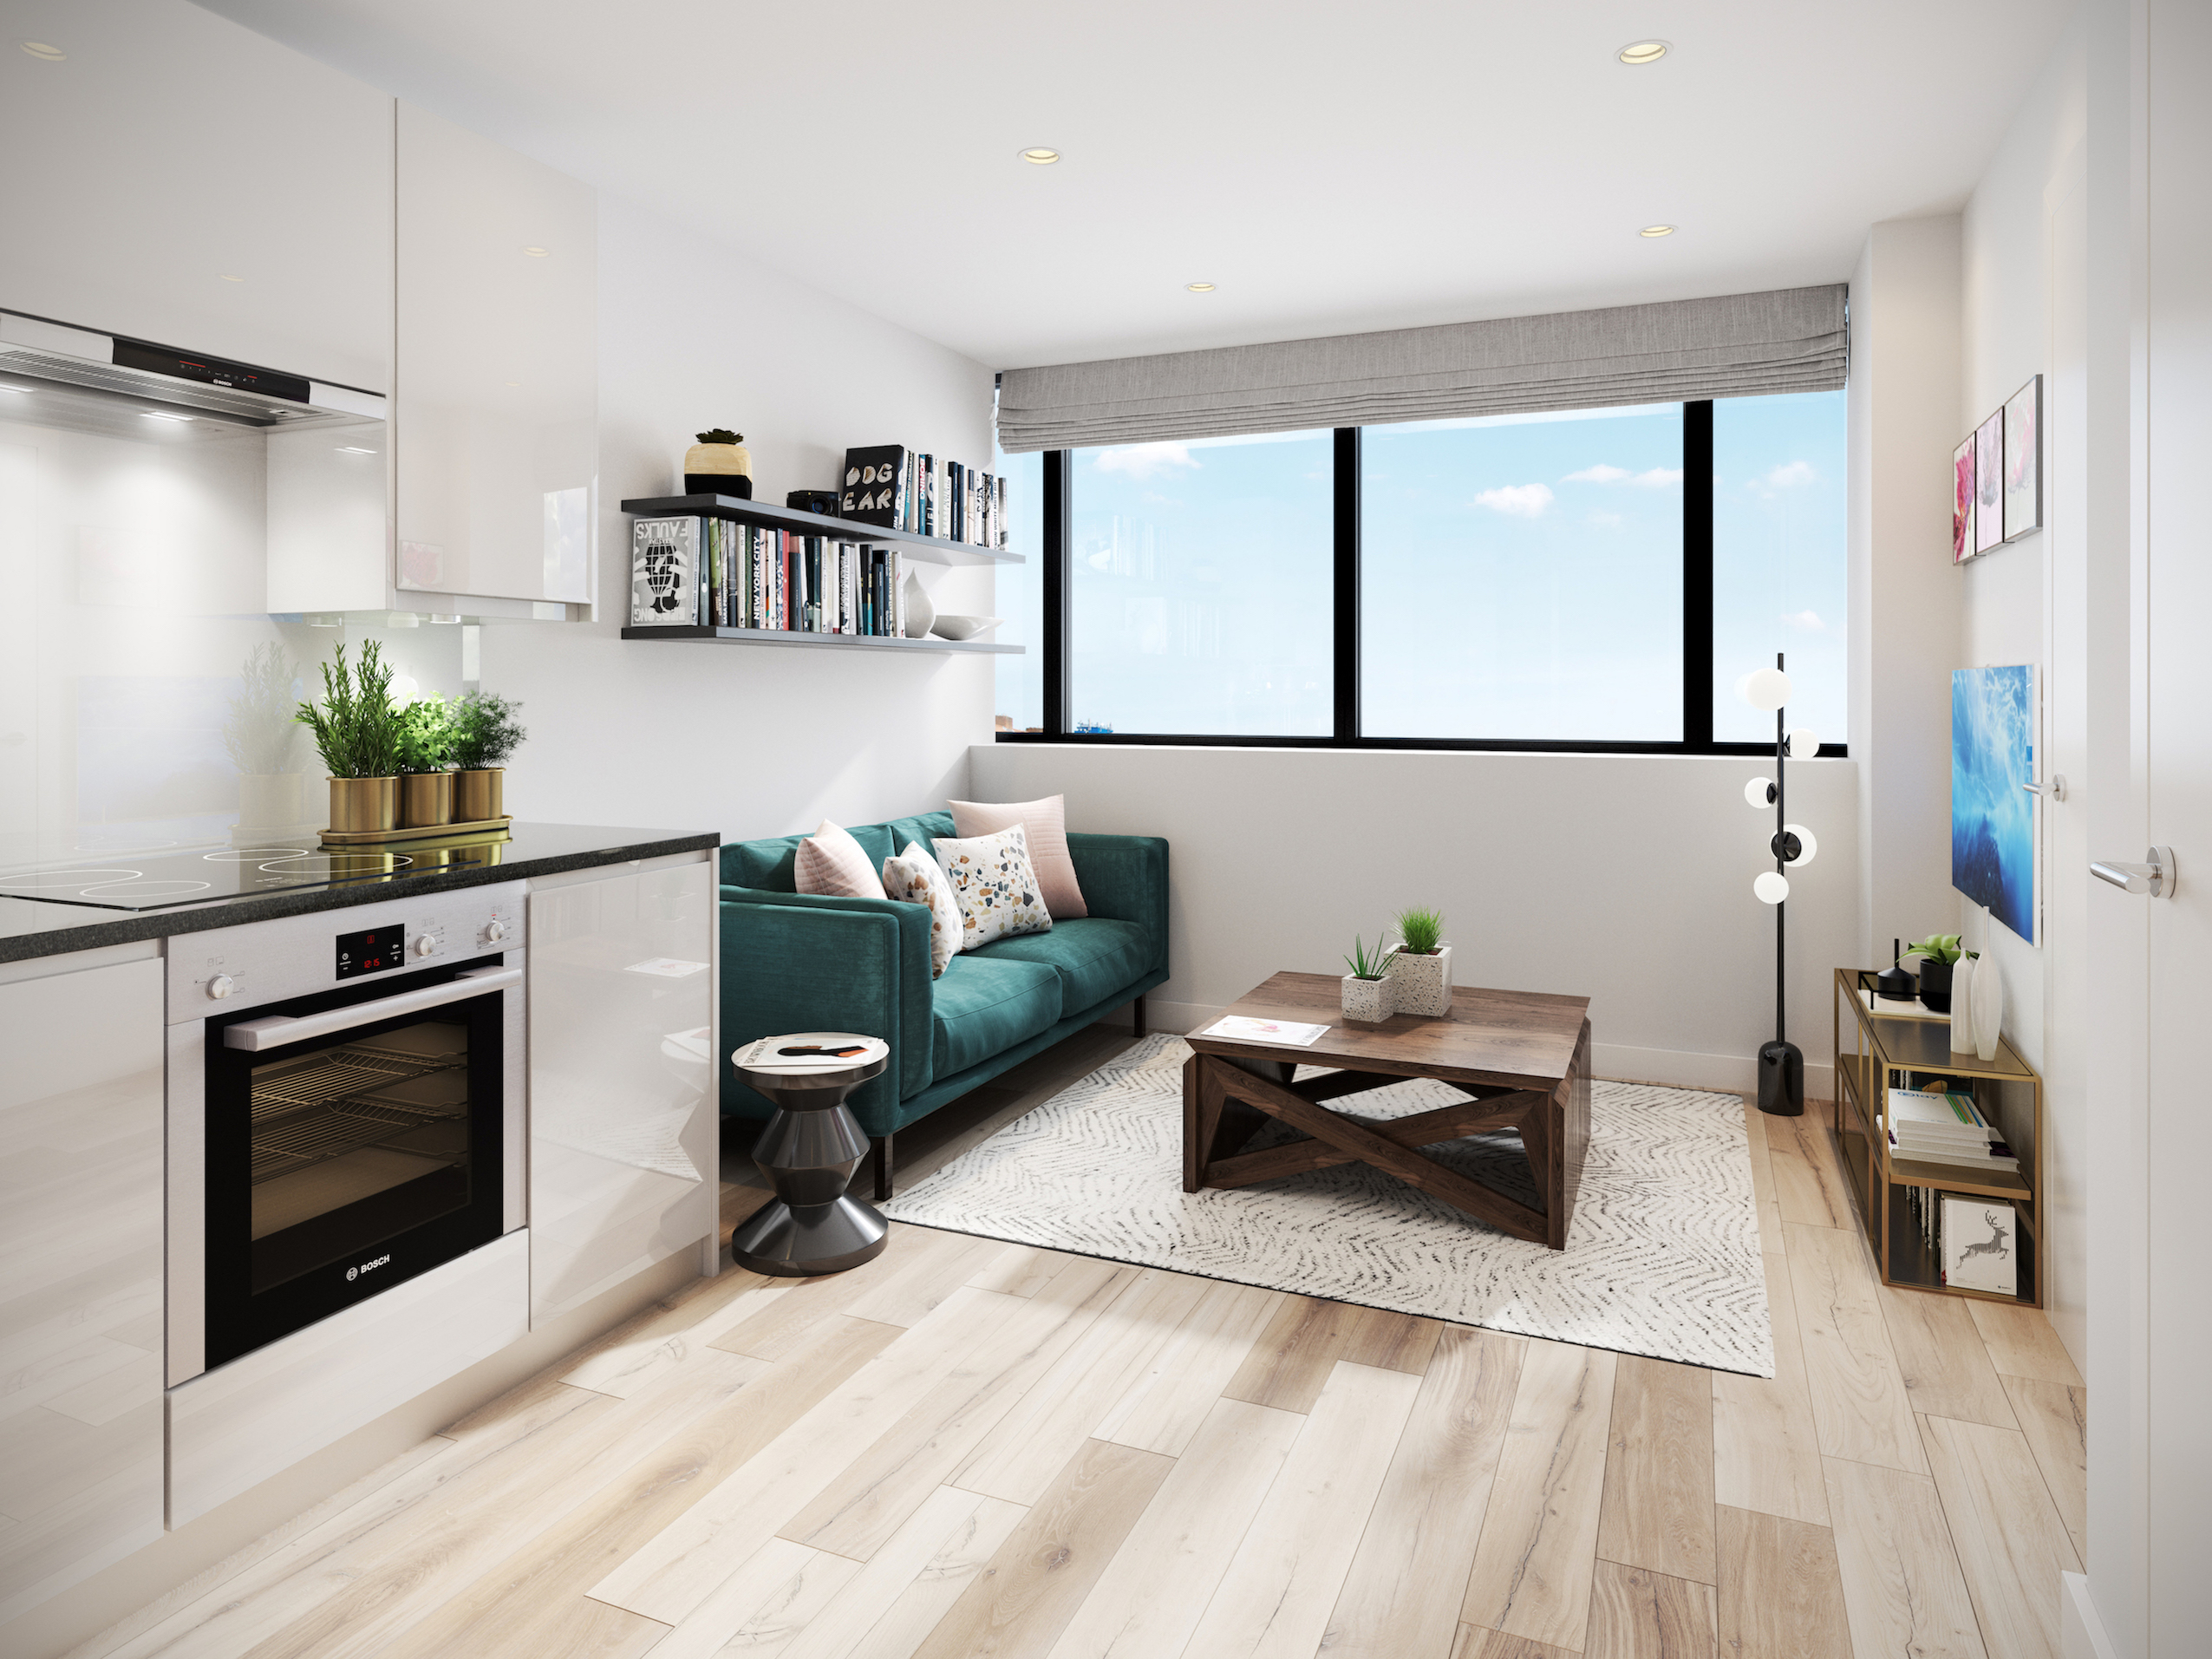 New study shows 71% of Brits support micro-apartments